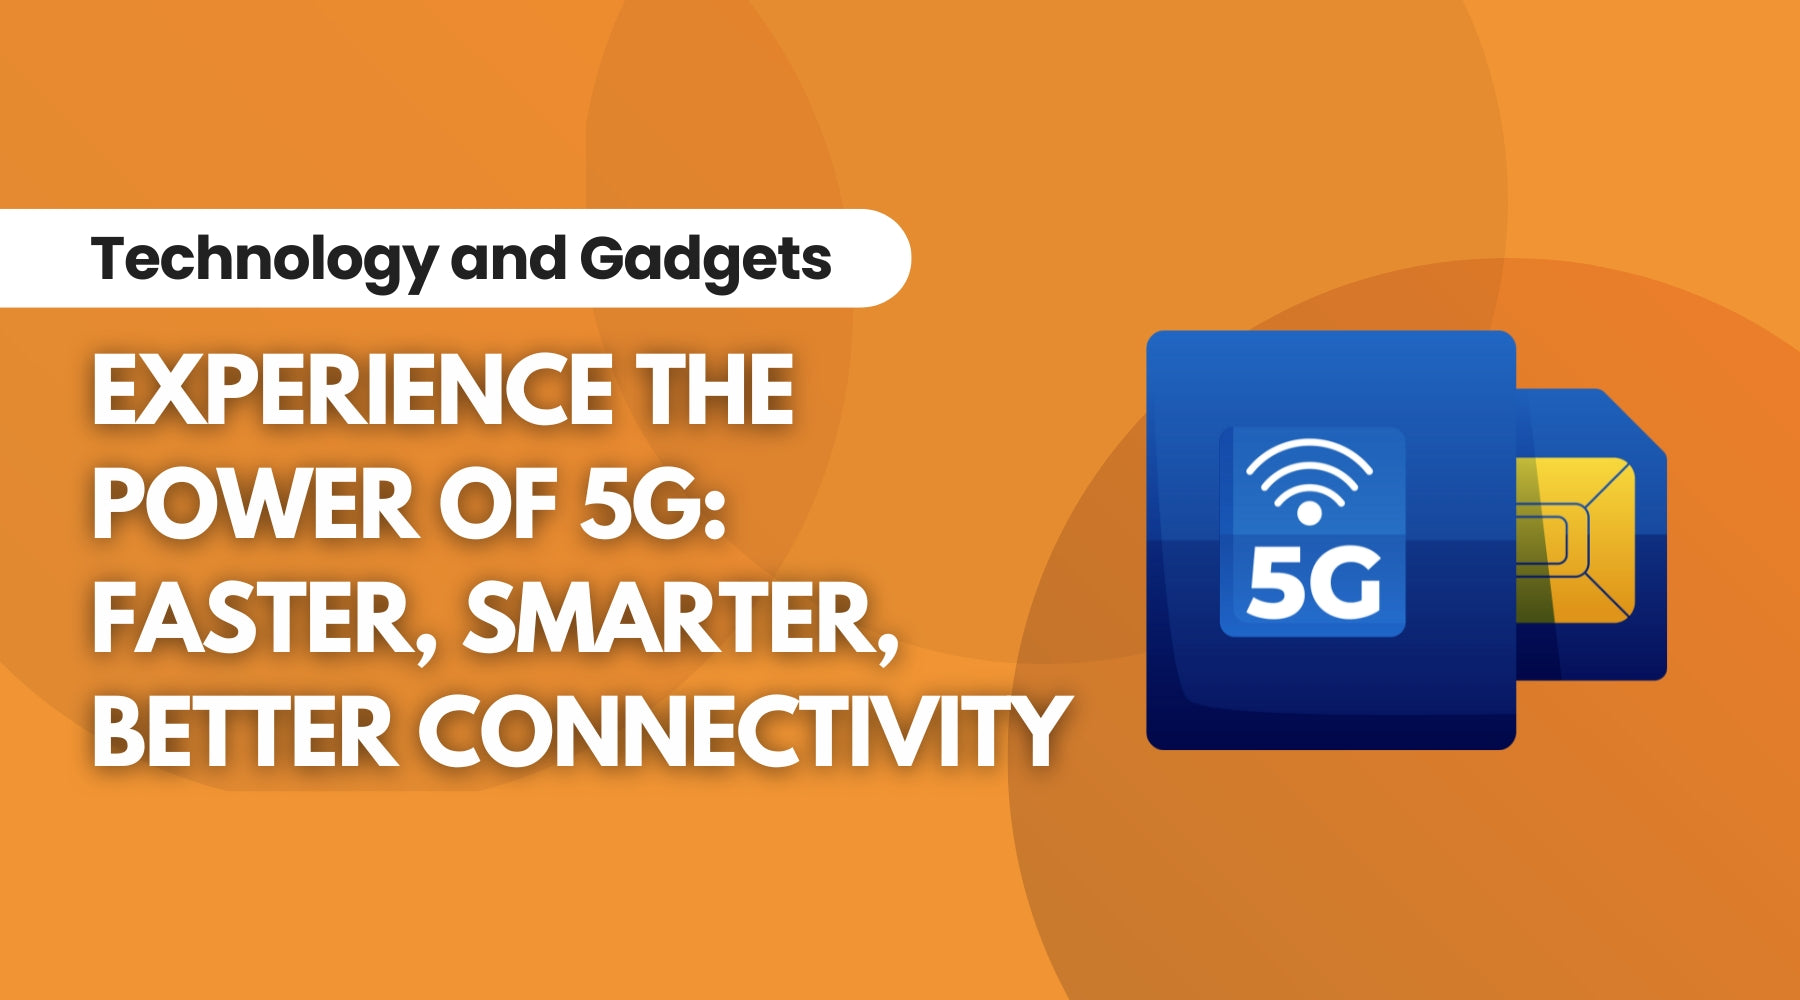 Experience the Power of 5G: Faster, Smarter, Better Connectivity